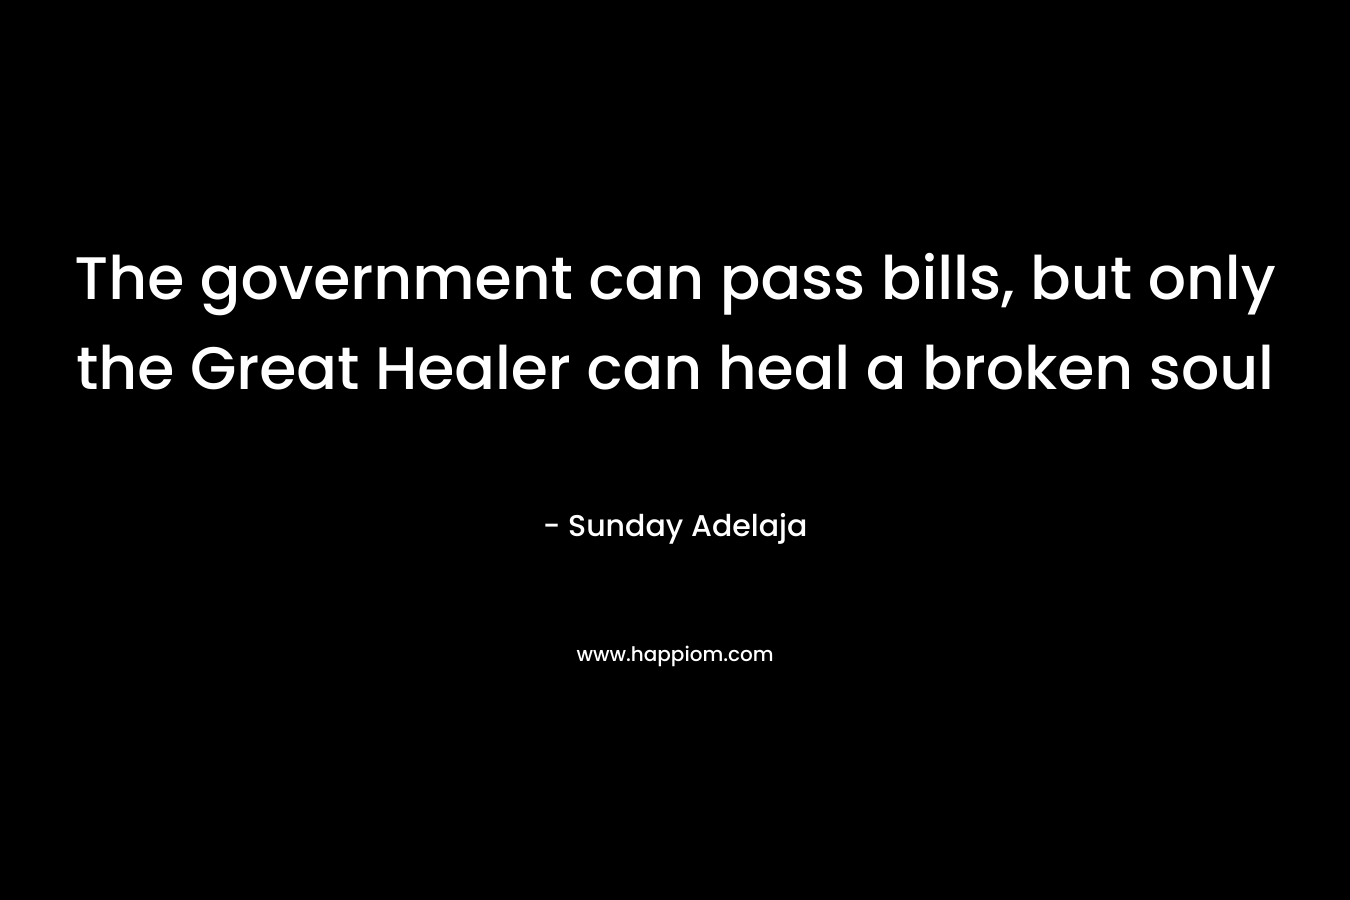 The government can pass bills, but only the Great Healer can heal a broken soul